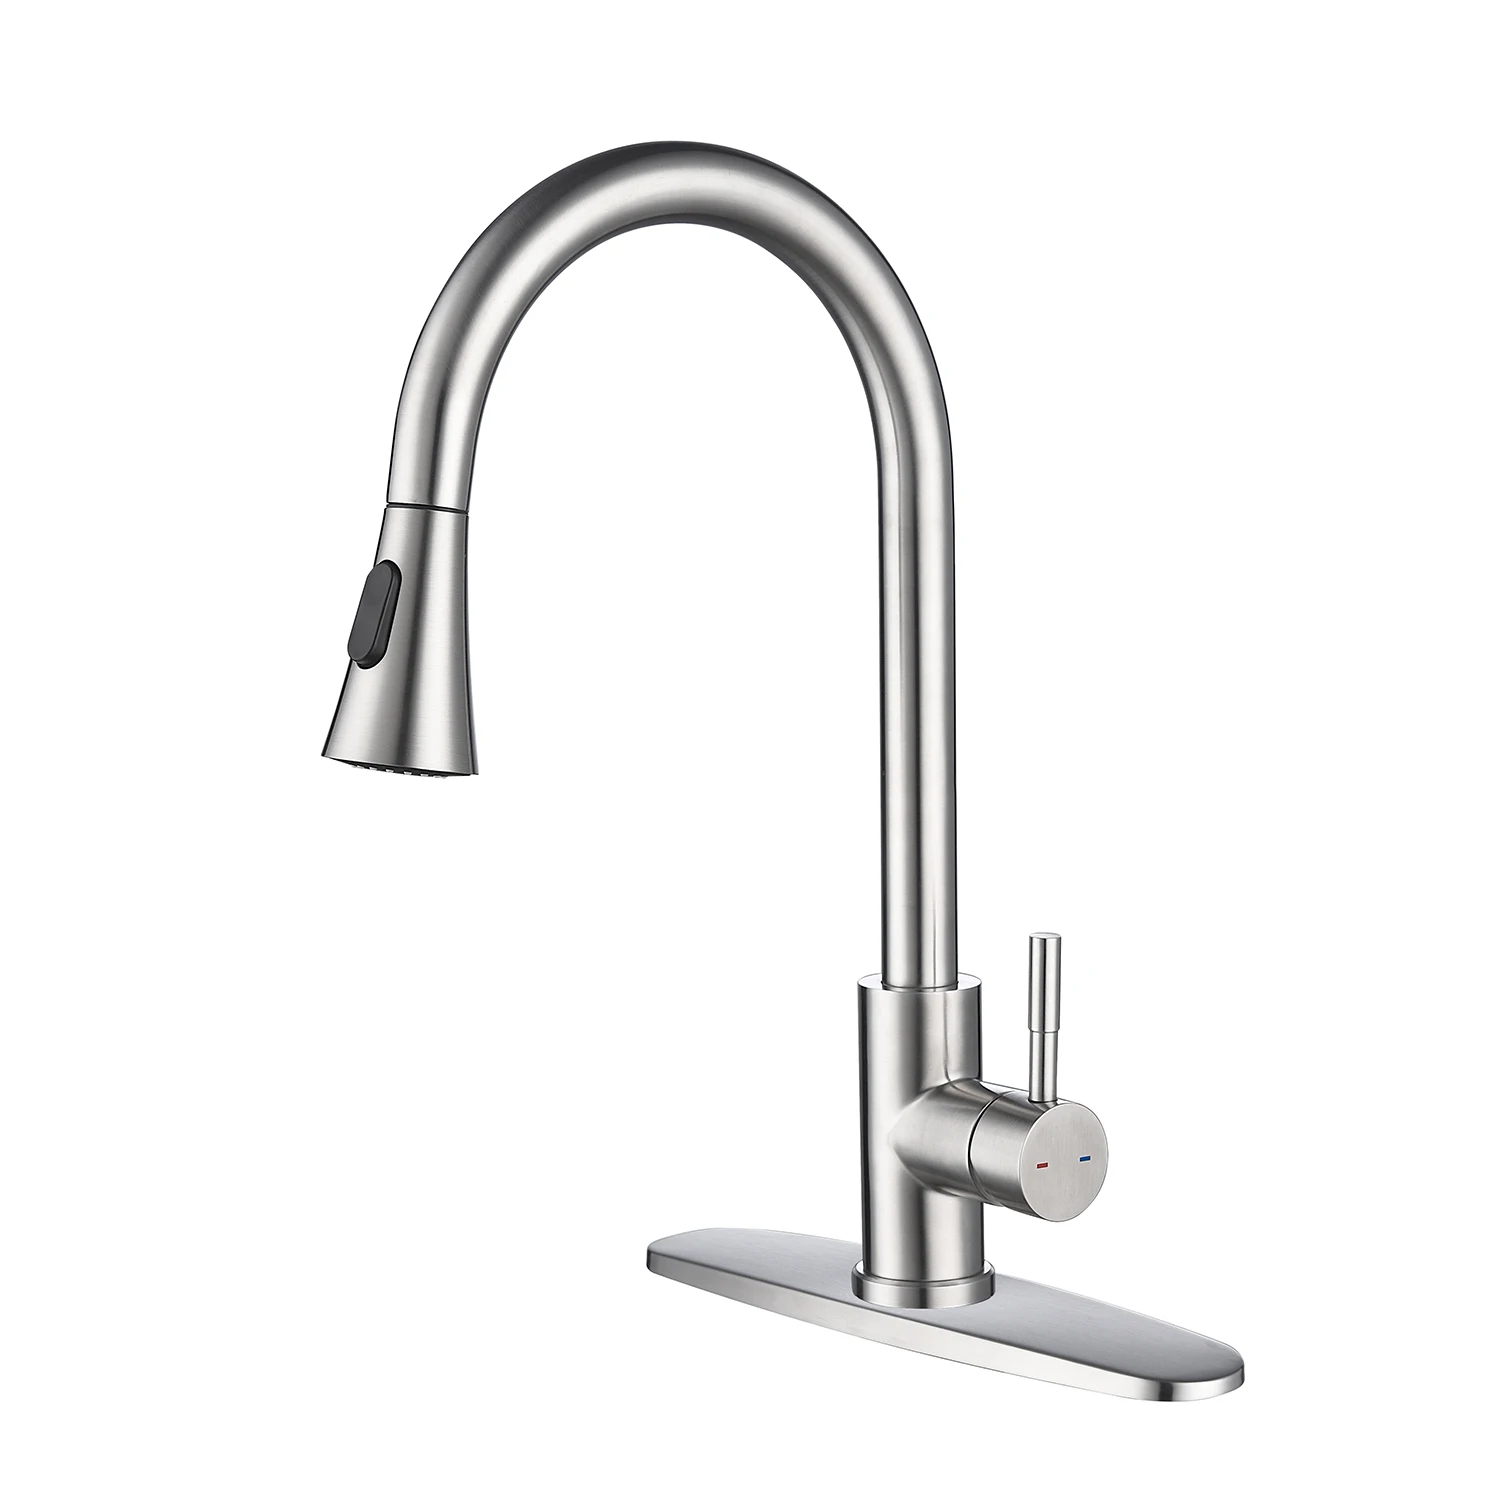 Brushed Nickel Kitchen Faucet Single Hole Pull Out Spout Kitchen Sink Mixer Tap Stream Sprayer Head Black Mixer Tap